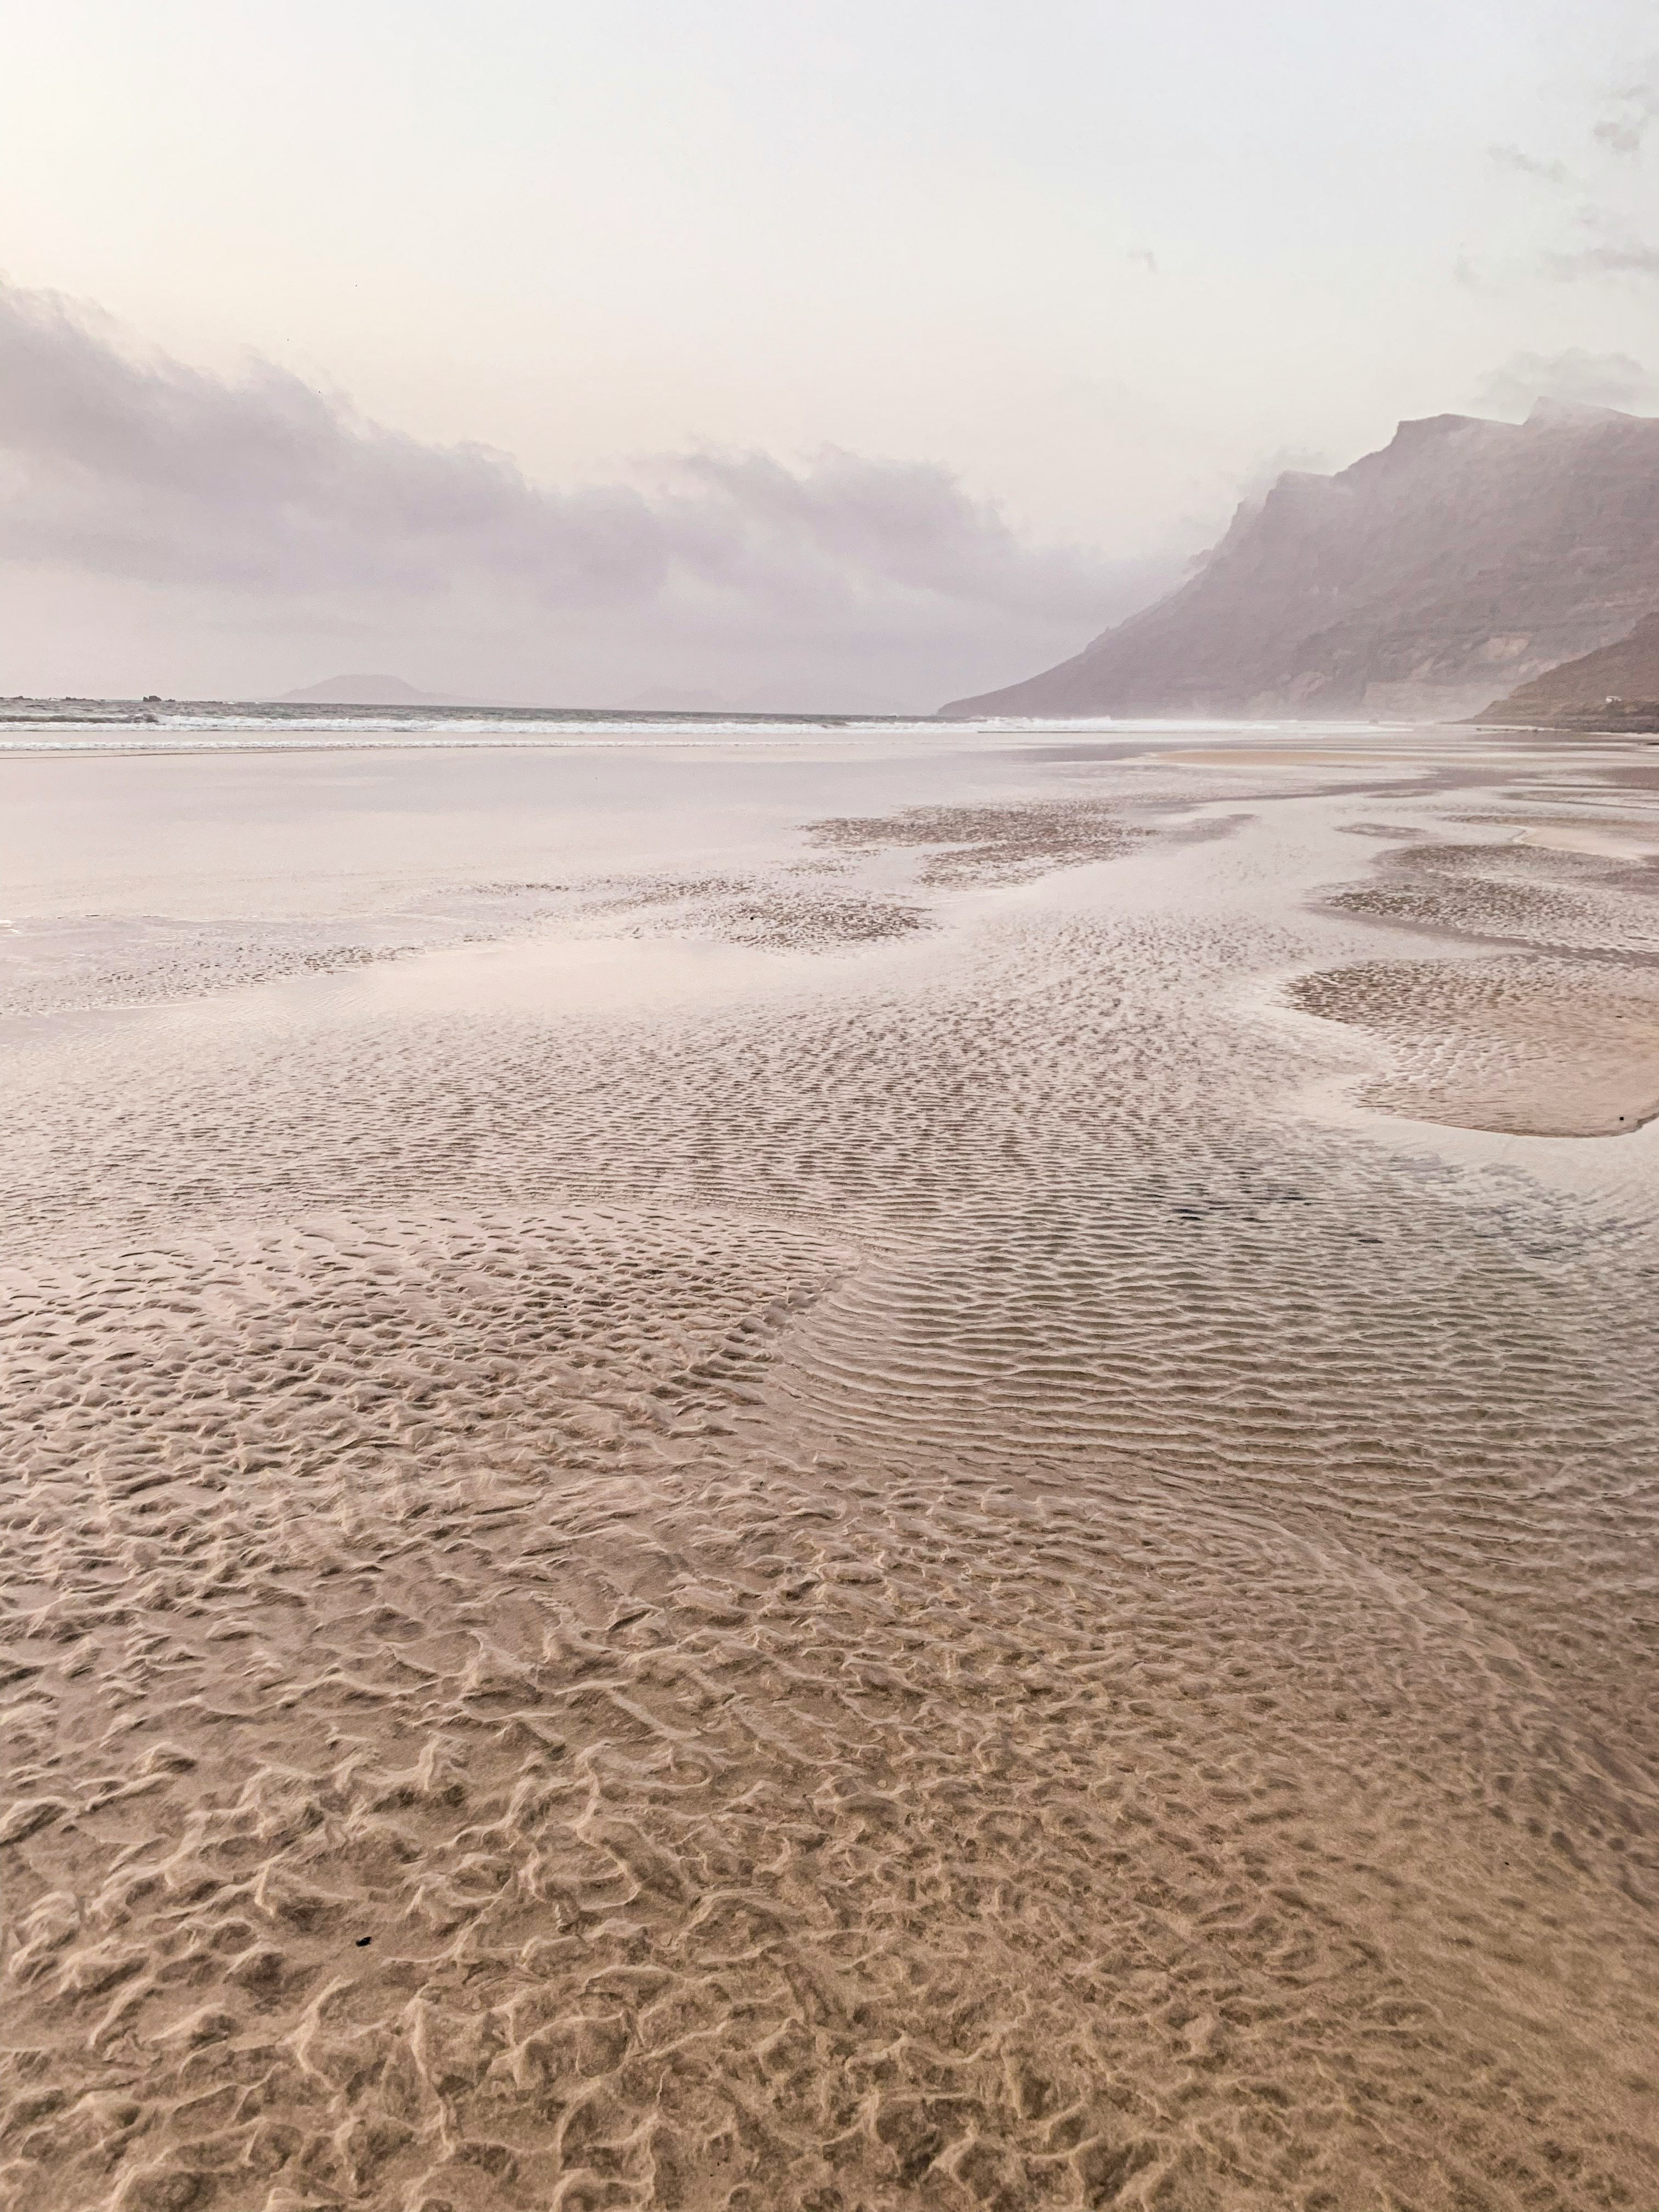 Famara beach, textured sand and volcanic mountains in the back